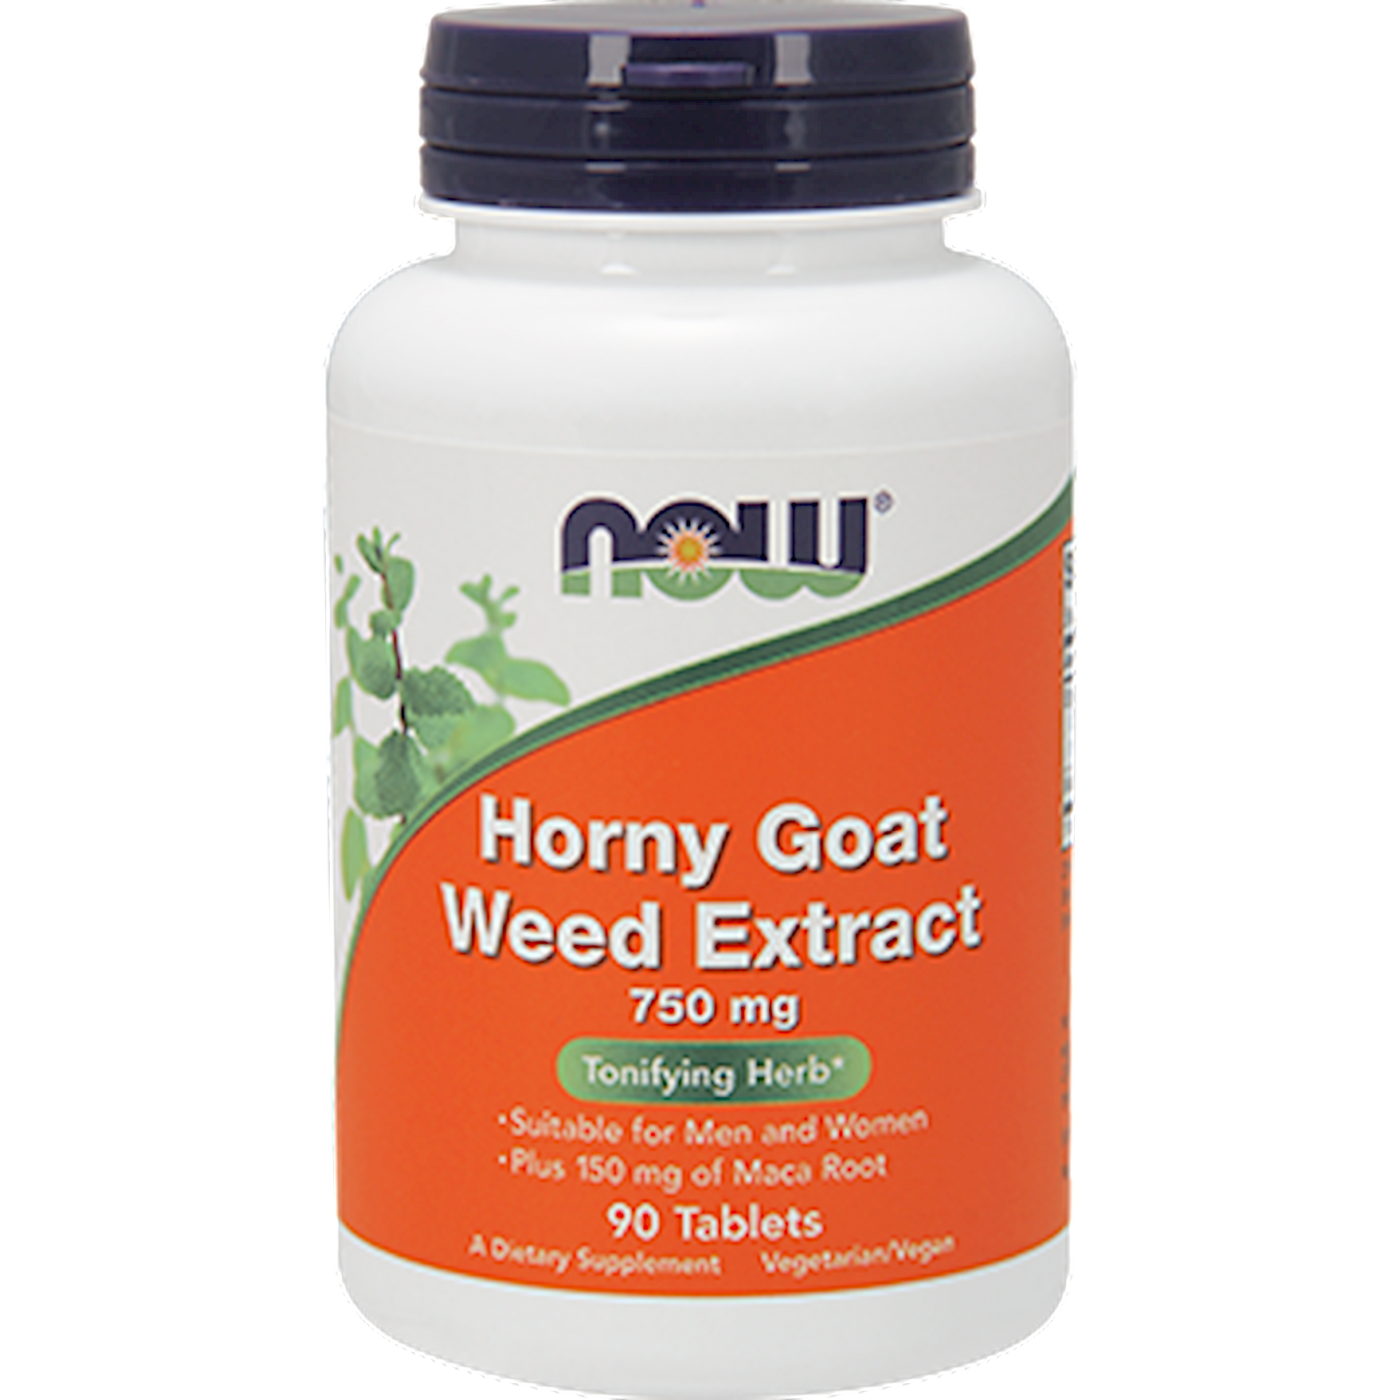 Horny Goat Weed Extract 750 mg 90 tabs Curated Wellness